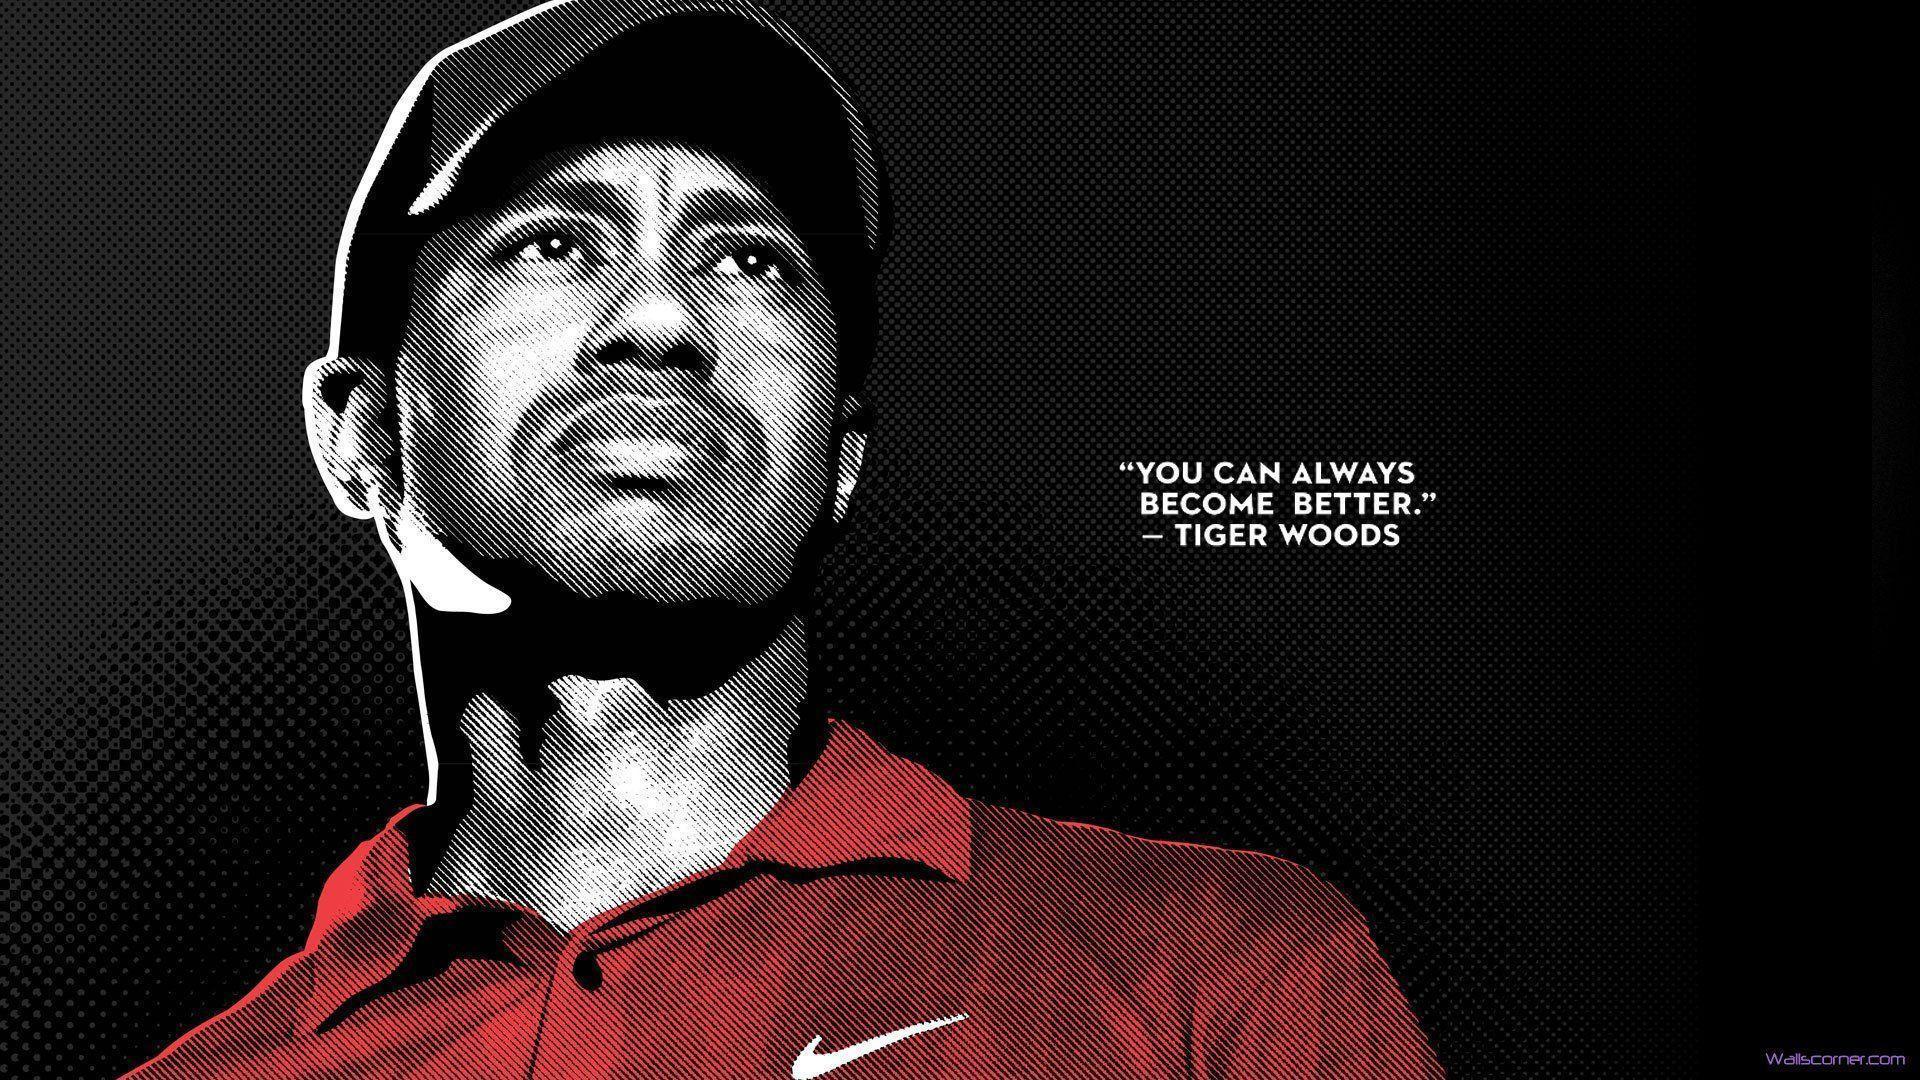 Wallpapers For > Nike Golf Iphone Wallpapers